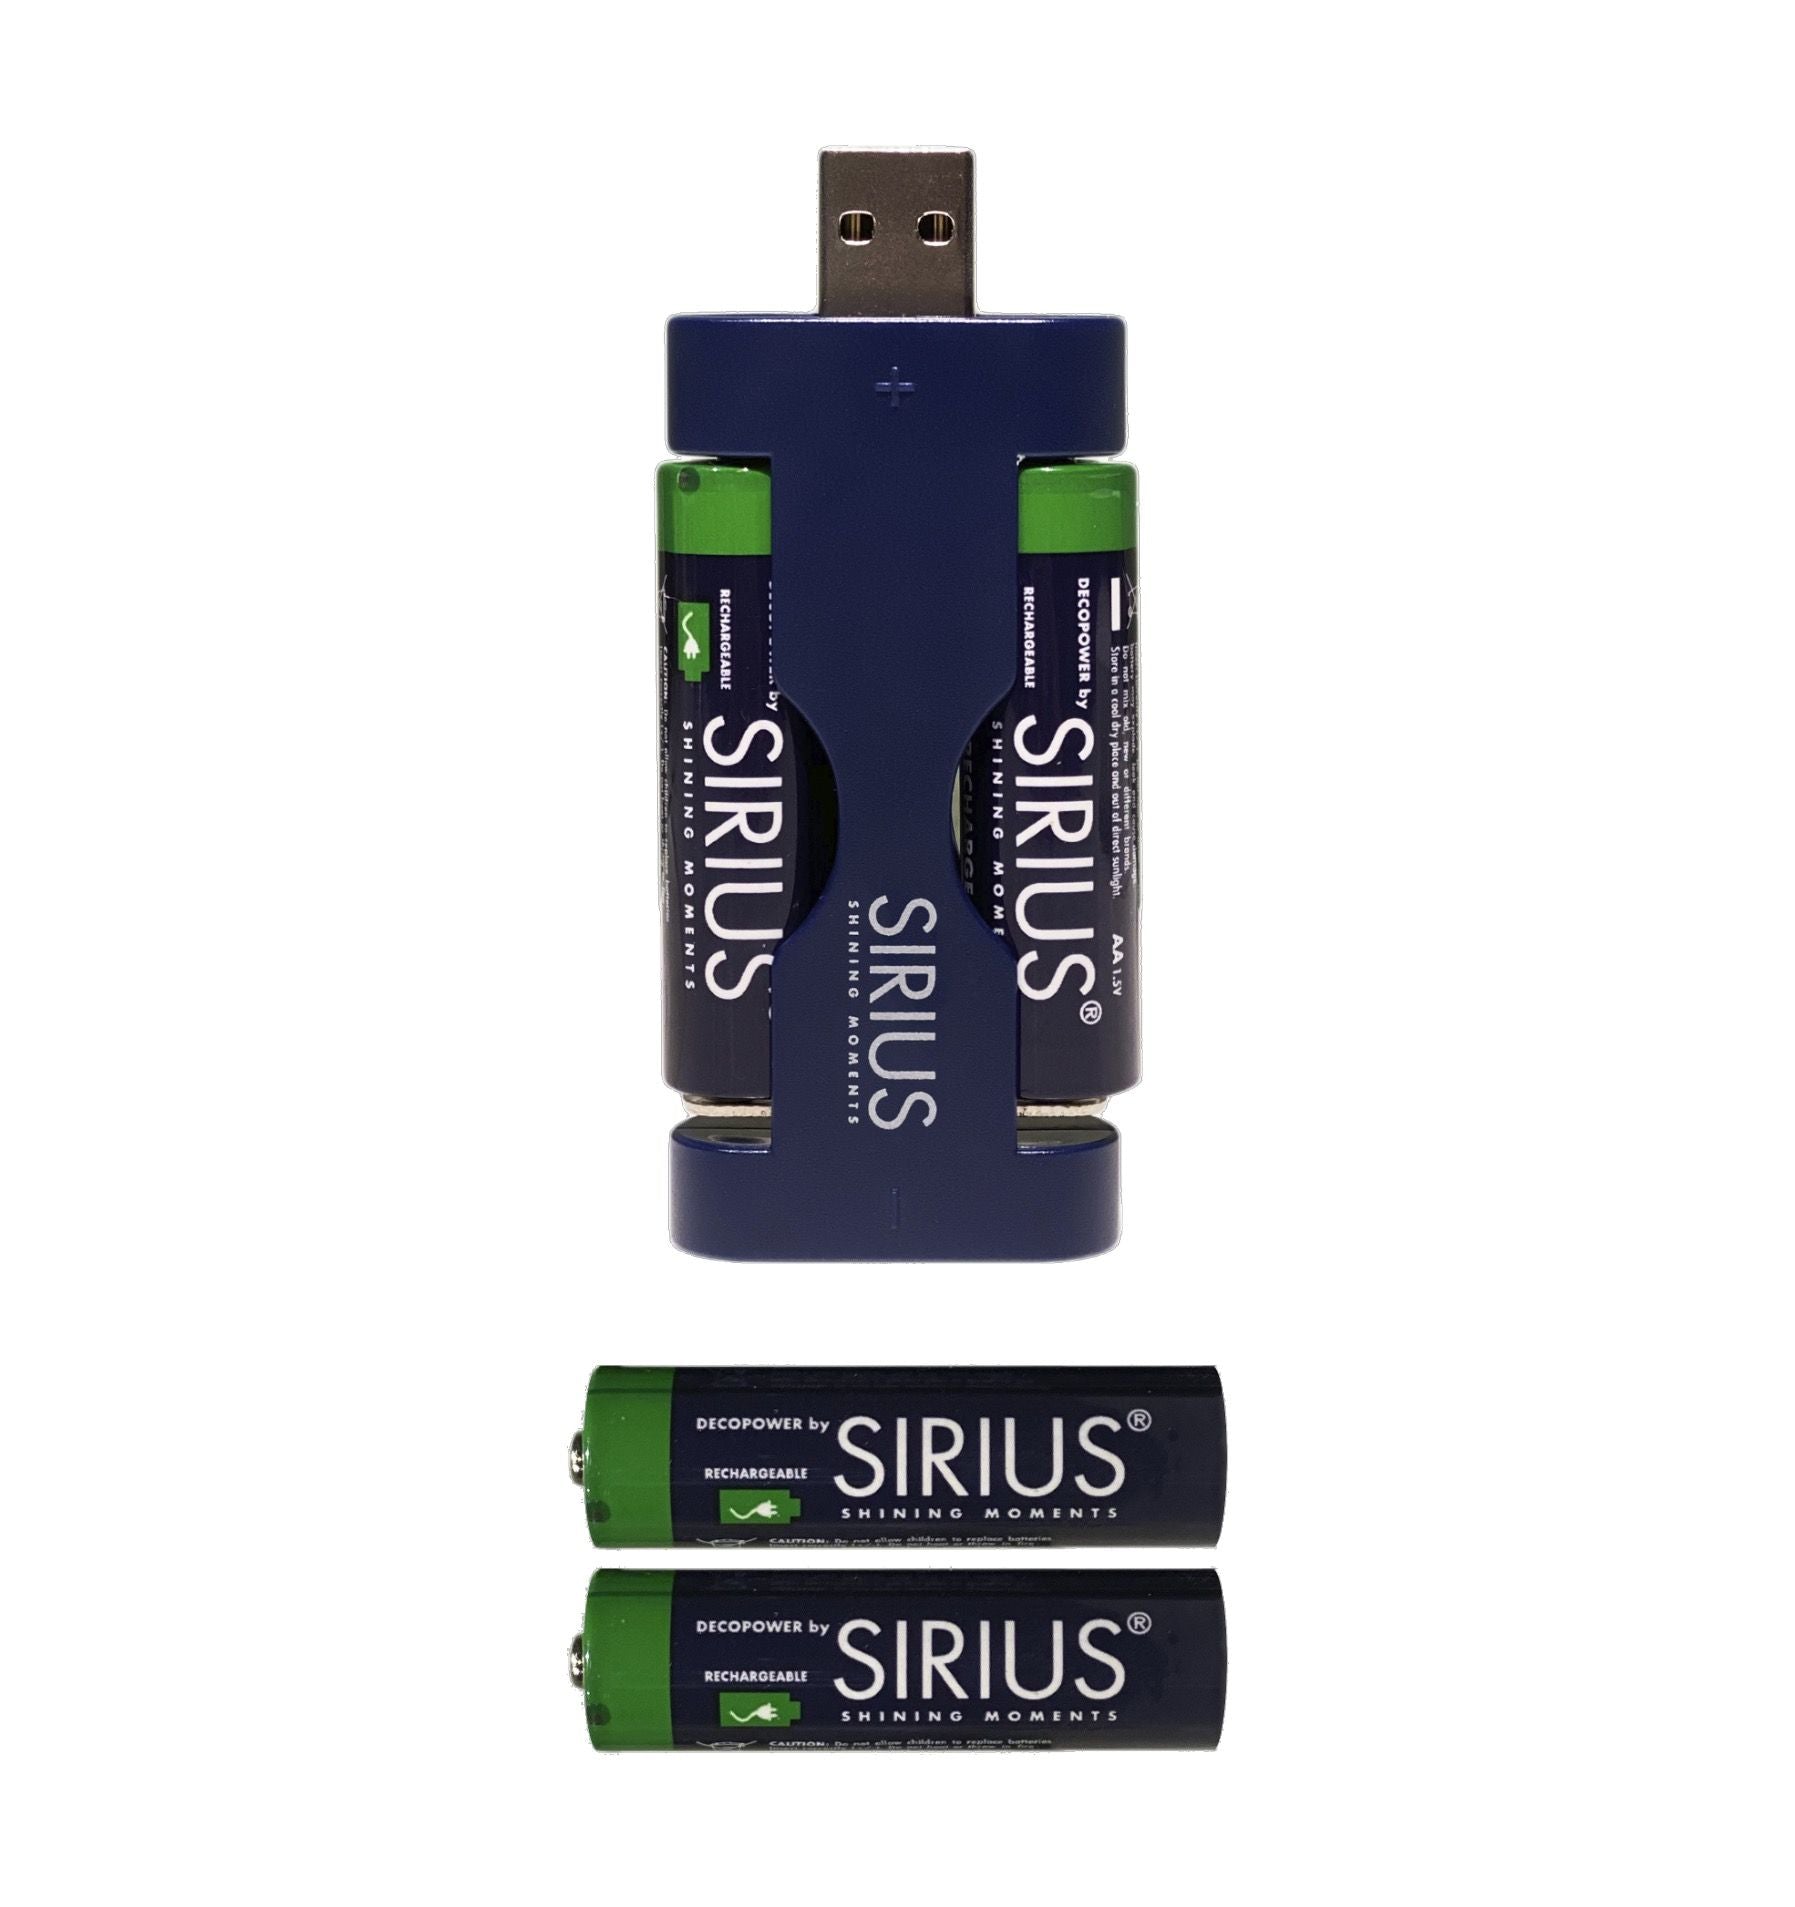 Sirius Deco Power Usb Charger Incl. 4x Aa Rechargeable Batteries